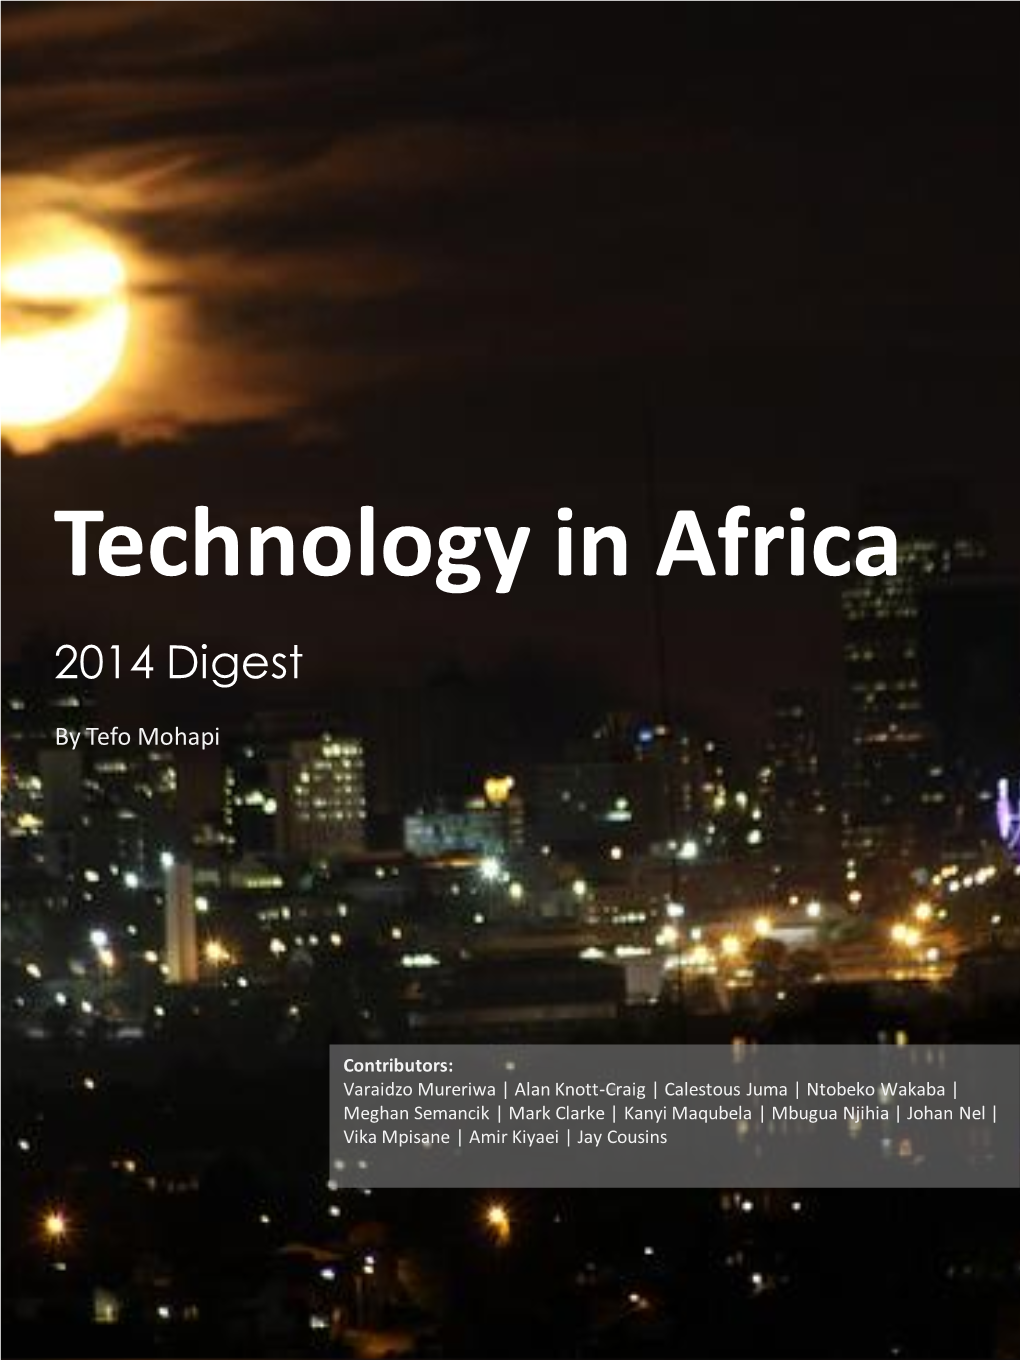 Technology in Africa 2014 Digest